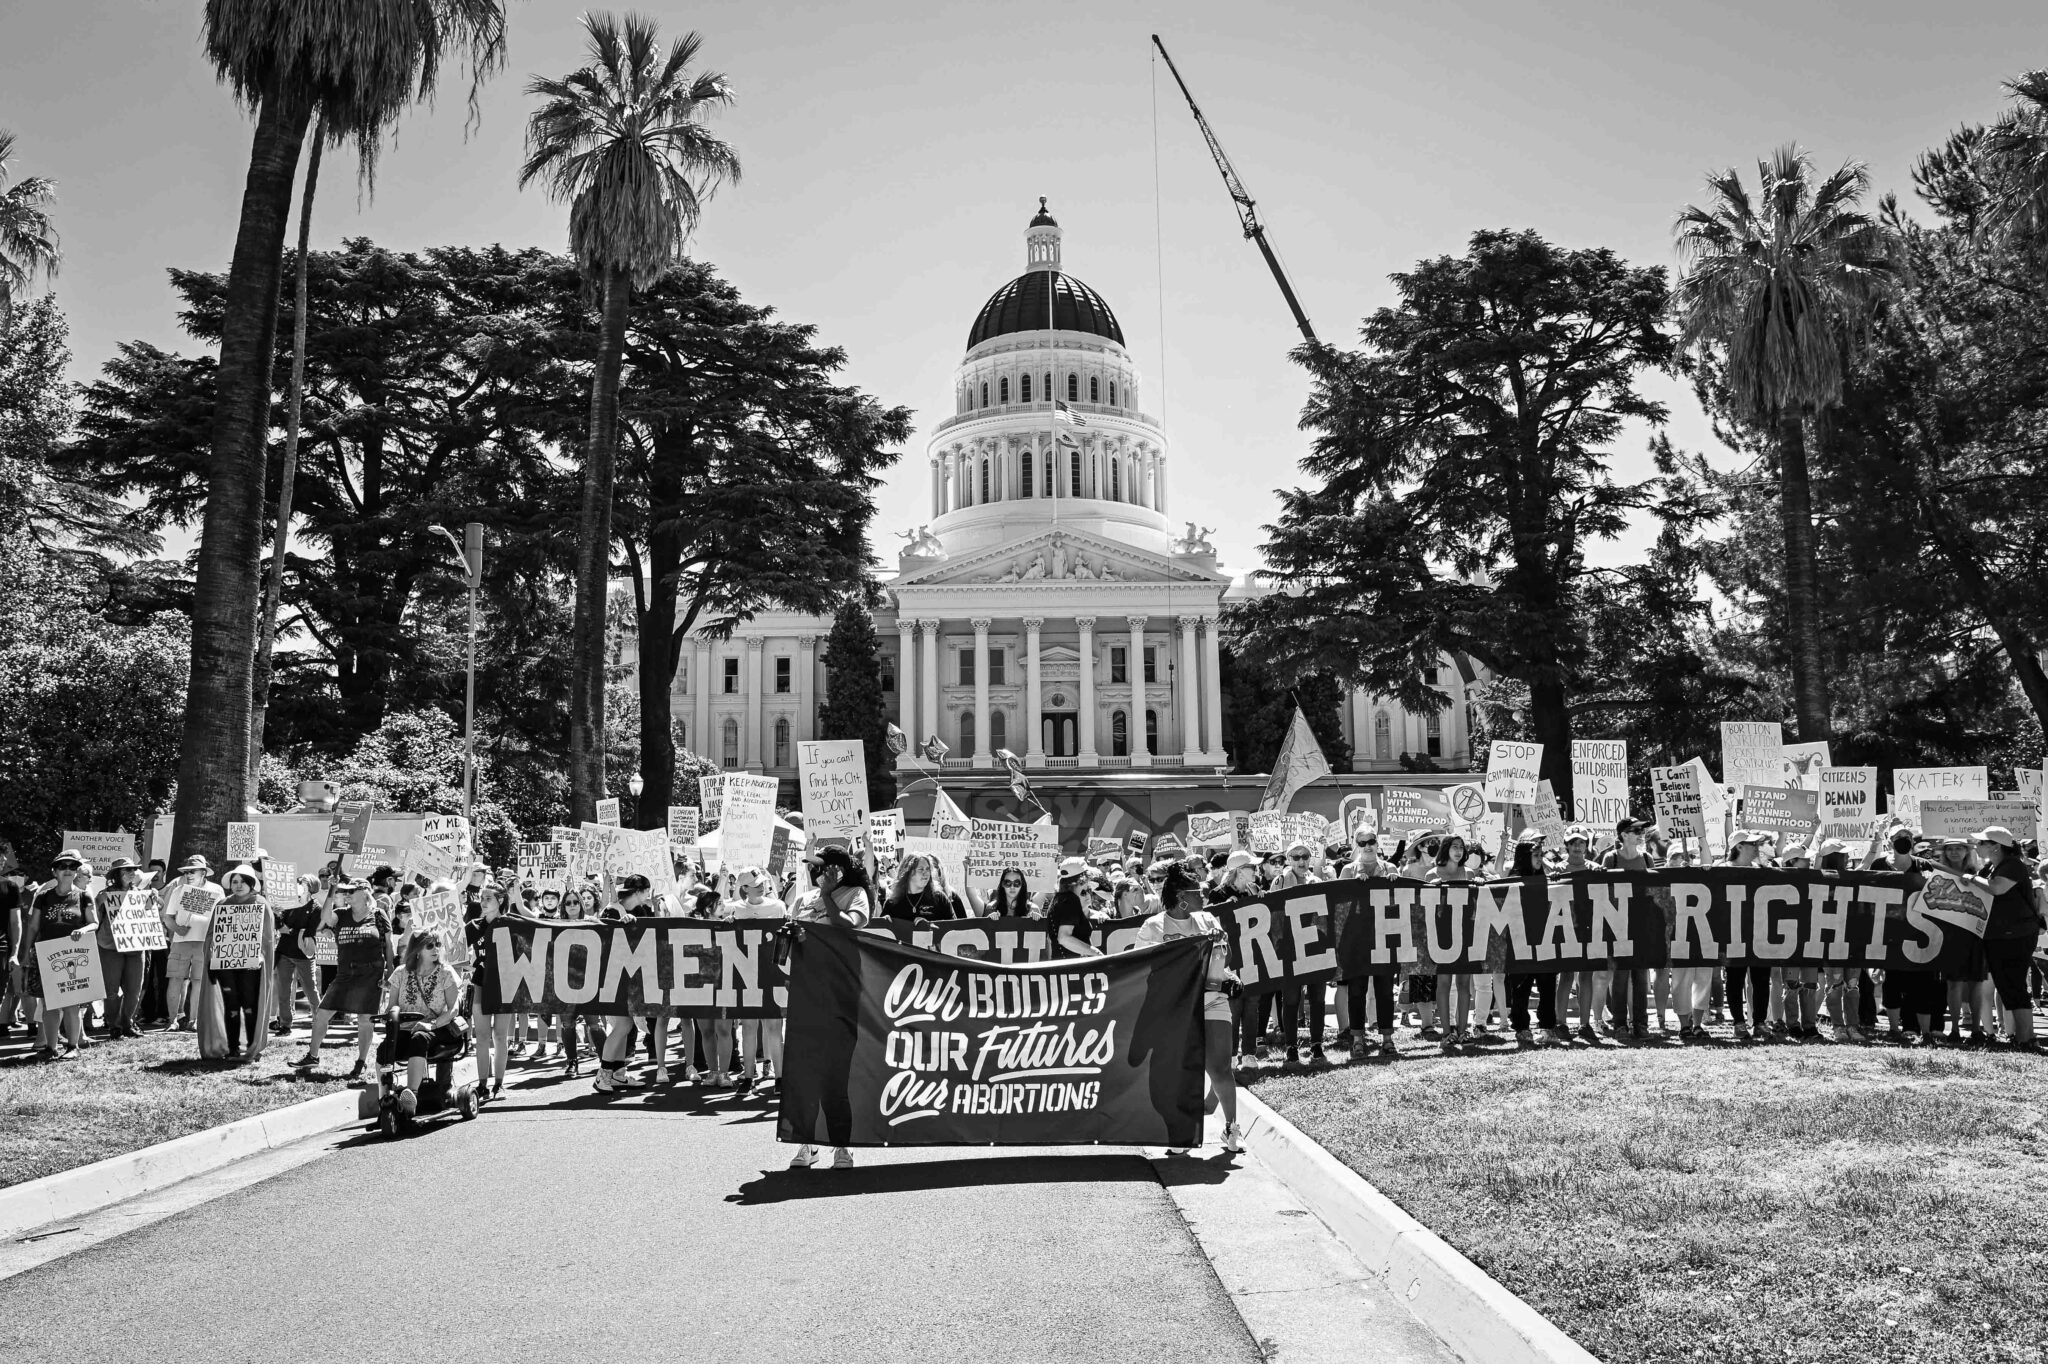 Bans off our bodies march, sacramento, california black and white 